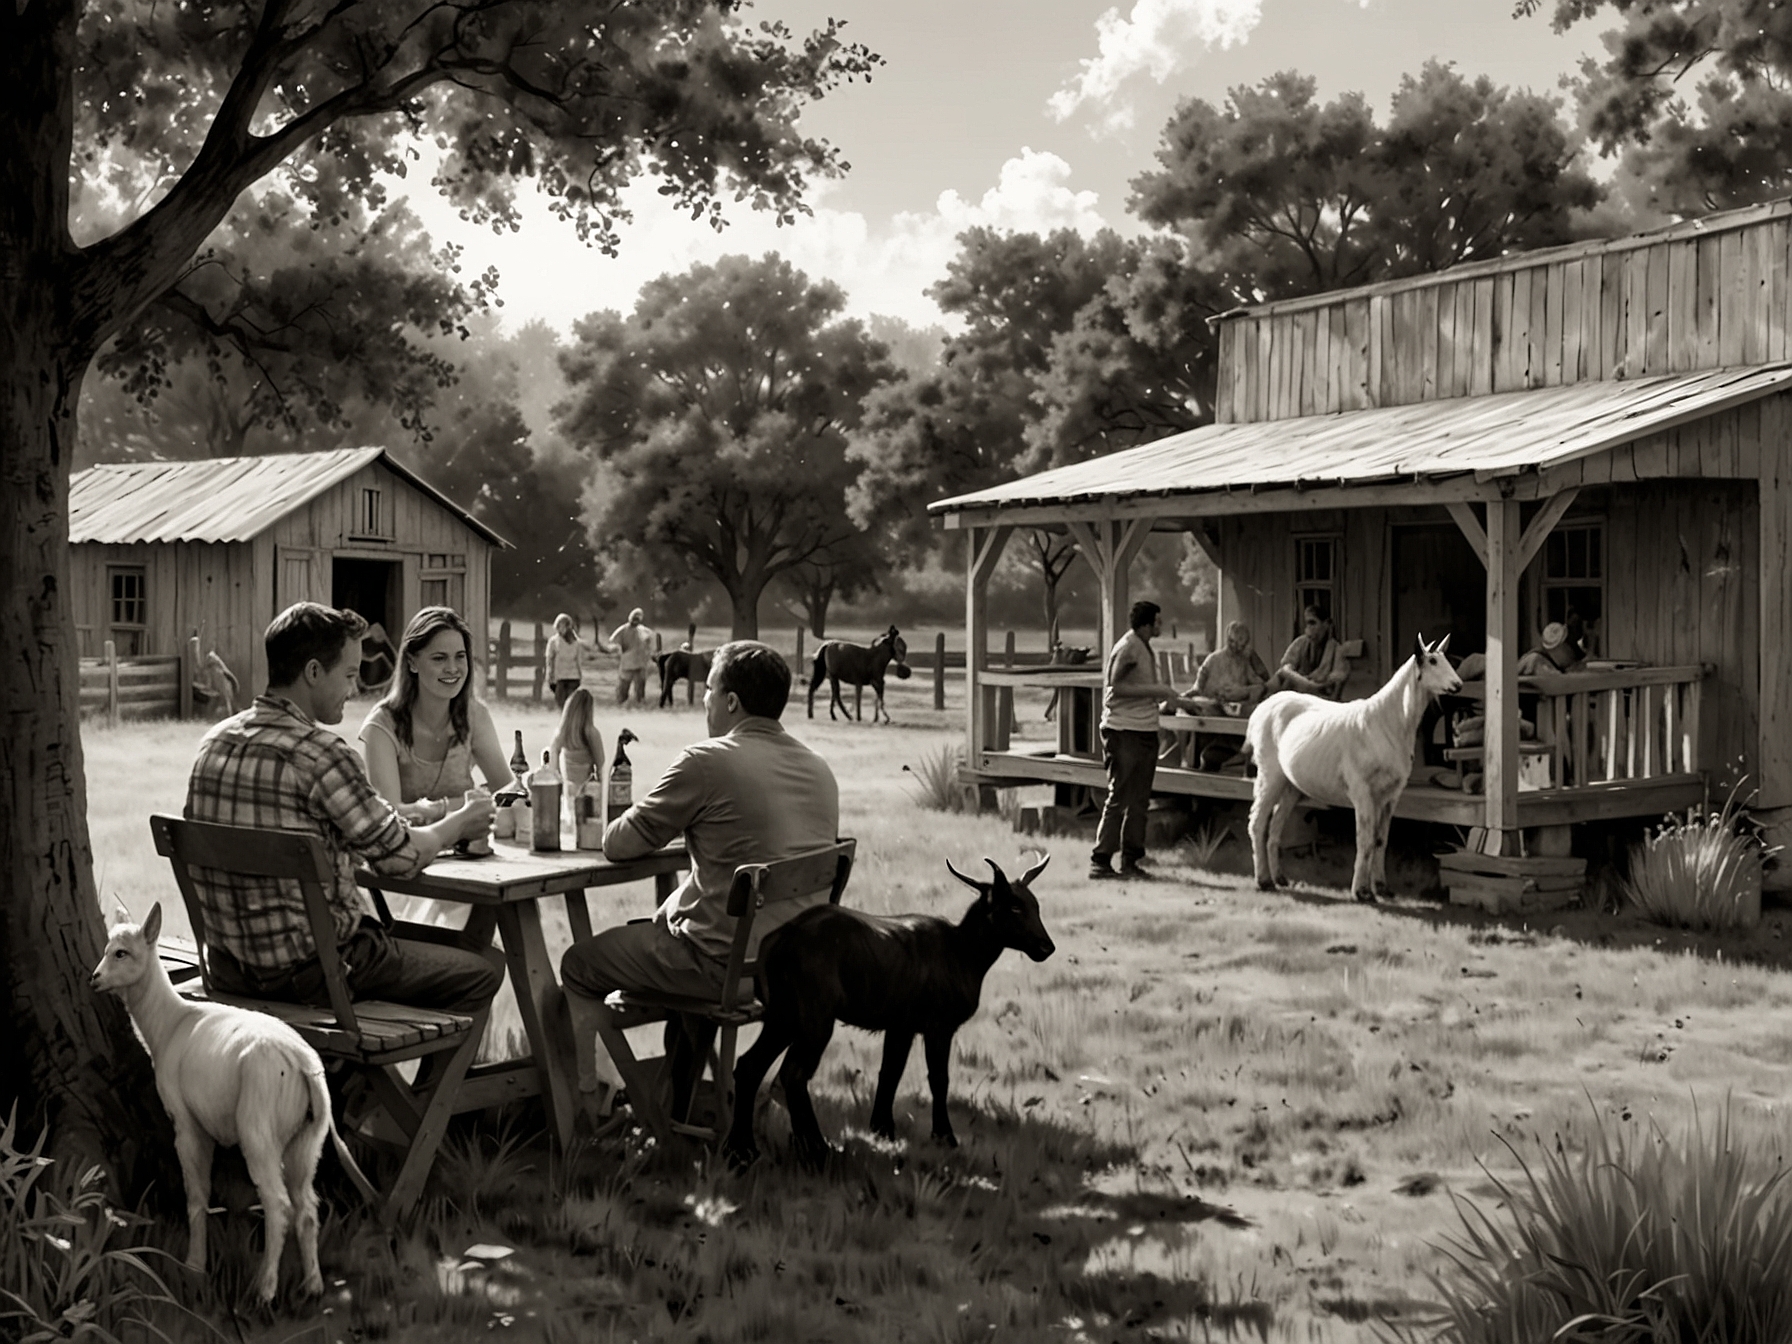 A peaceful scene at the Cajun Corral Farm where families gather for a relaxing picnic and interact with the resident goats.